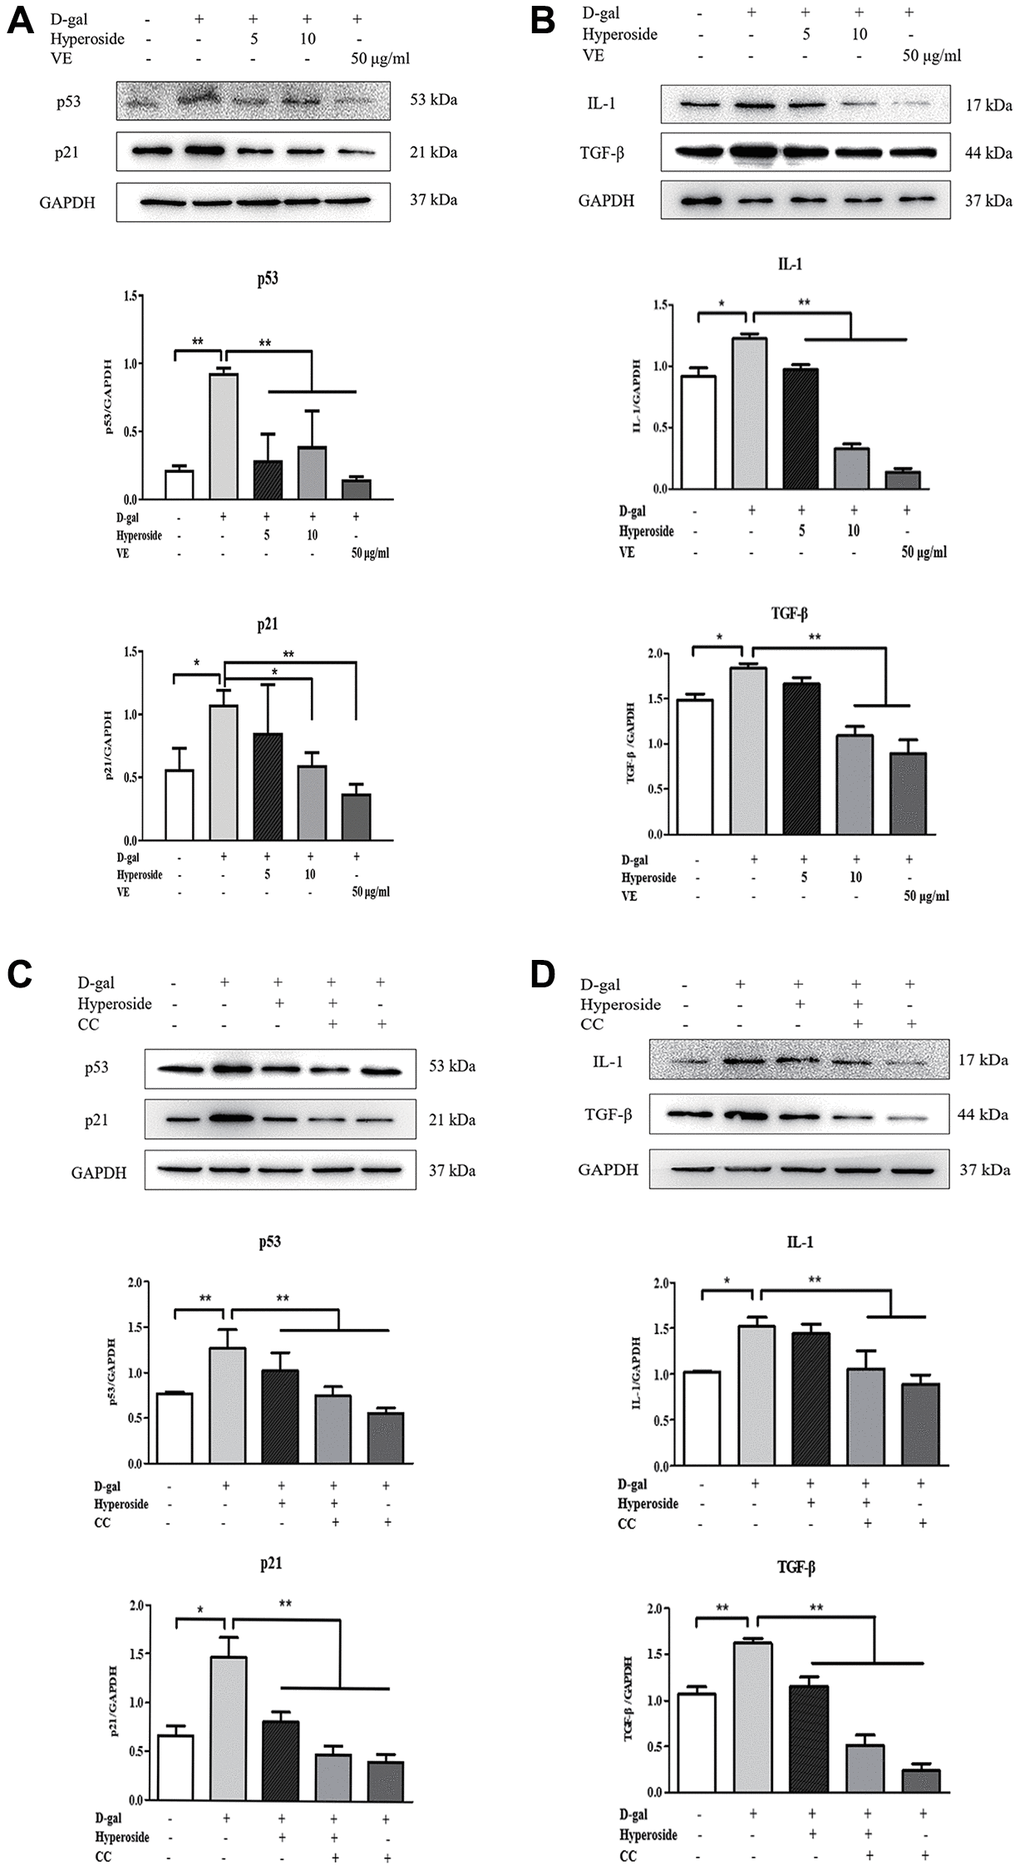 The actions of hyperoside, vitamin E and compound C on renal cellular aging and injury in vitro. (A, B) The NRK-52E cells were exposed to D-gal at 100 mM, with the treatment of hyperoside at 0, 5, and 10 μg/ml and VE at 50 μg/ml for 24 hours, and subjected to a WB analysis for p53, p21, IL-1 and TGF-β, respectively. (C, D) The NRK-52E cells were exposed to D-gal, with the treatment of hyperoside and CC for 24 hours, and subjected to a WB analysis for p53, p21, IL-1 and TGF-β, respectively. The data are expressed as the mean ± SD, (n = 3), *P **P 